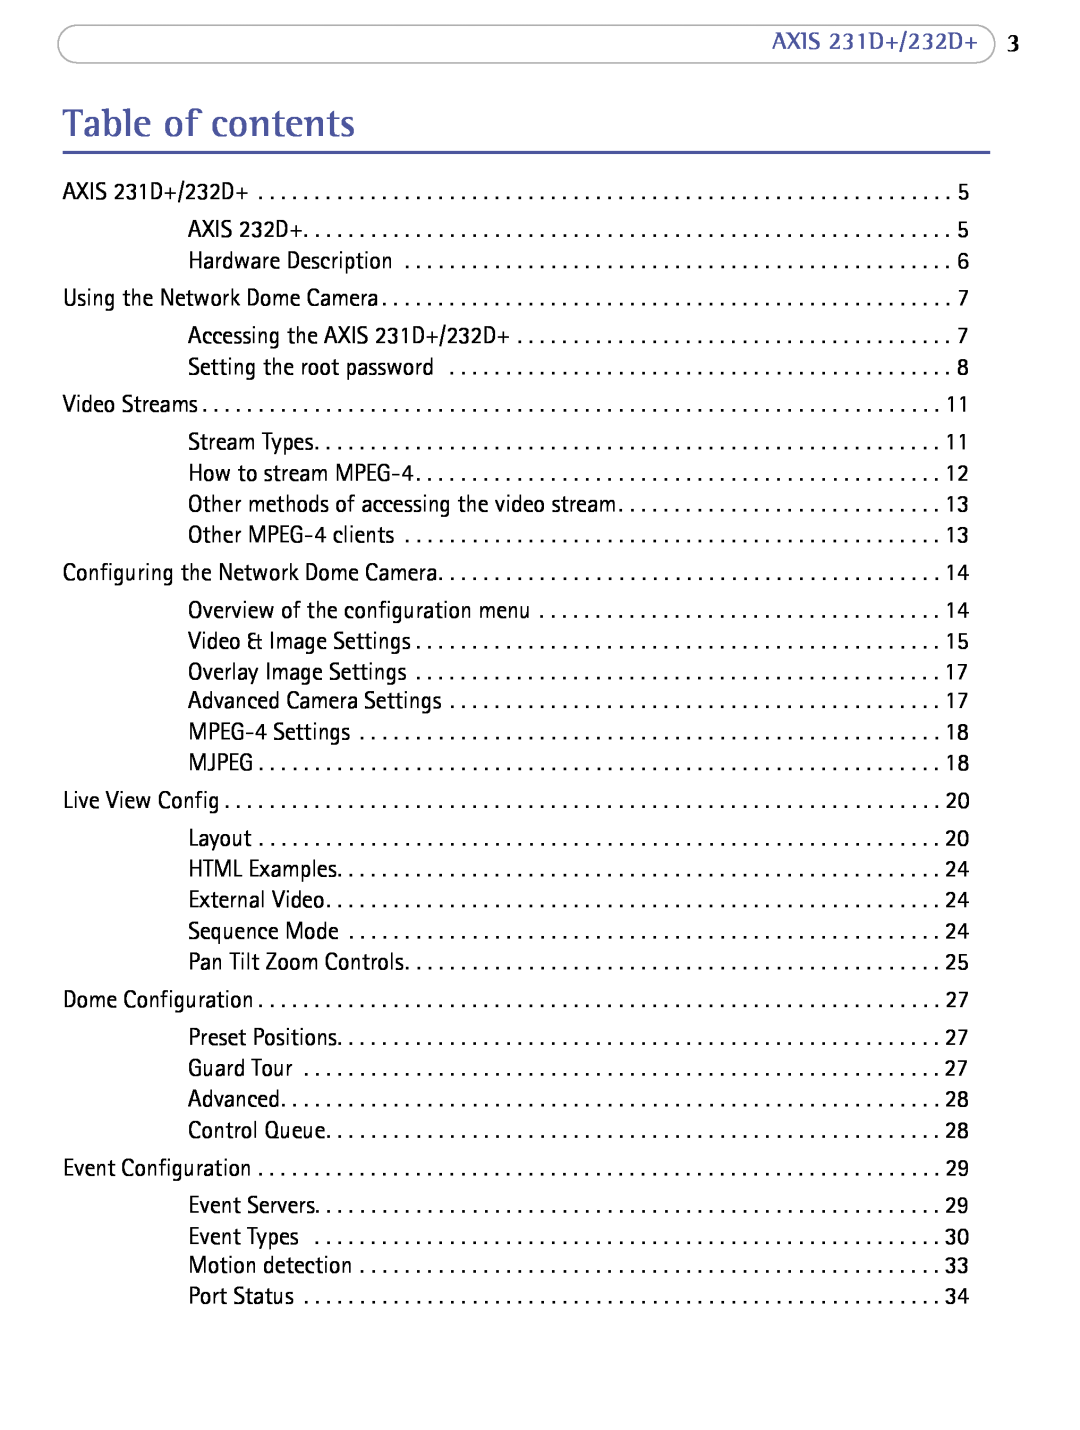 Axis Communications 232d+ user manual Table of contents, AXIS 231D+/232D+ 